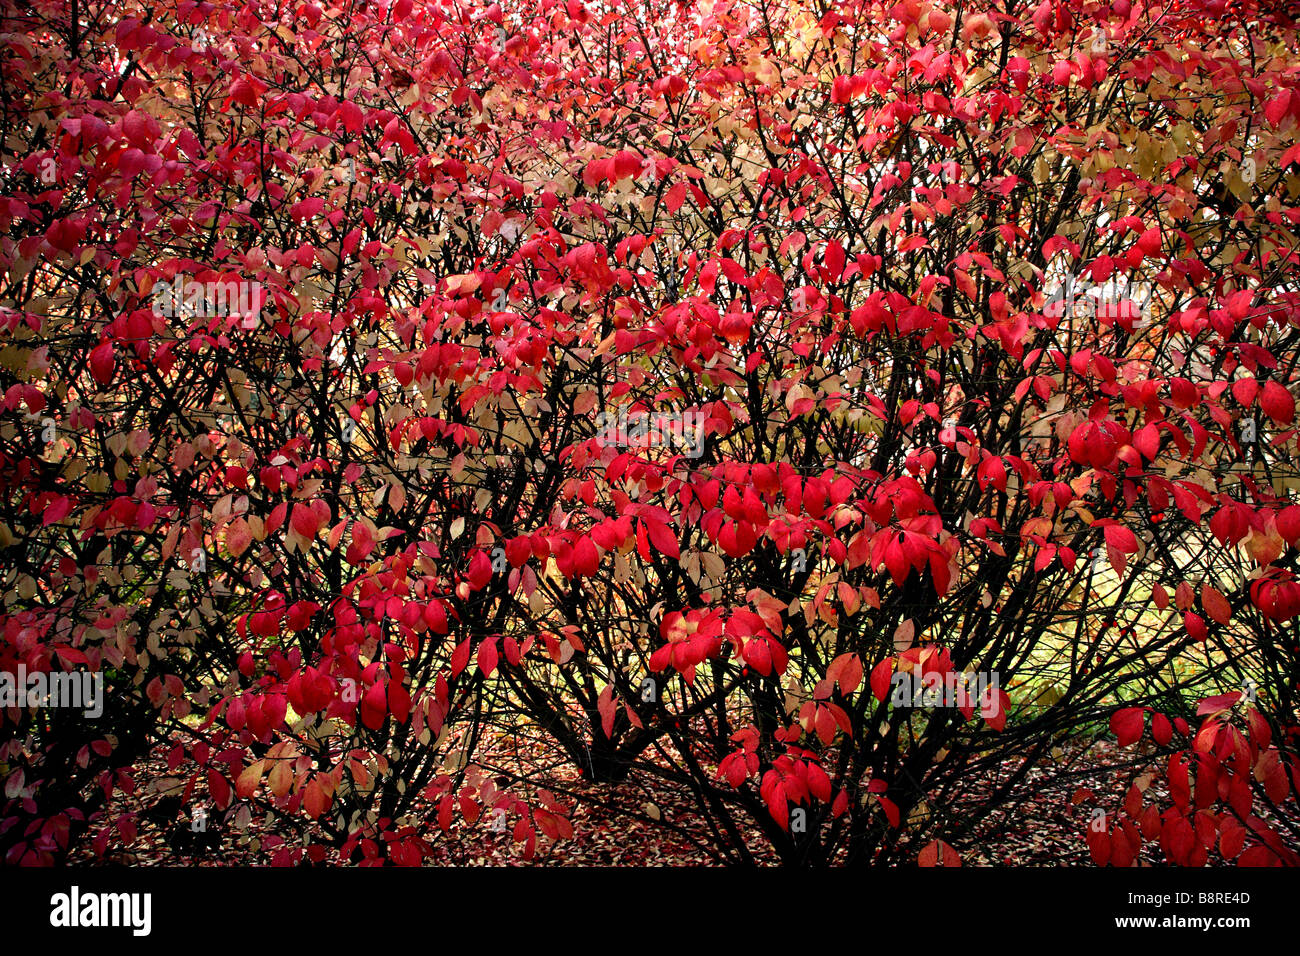 Close up on red leaved Red and yellow leaves on bush with black stems behind in group of bushes. Stock Photo